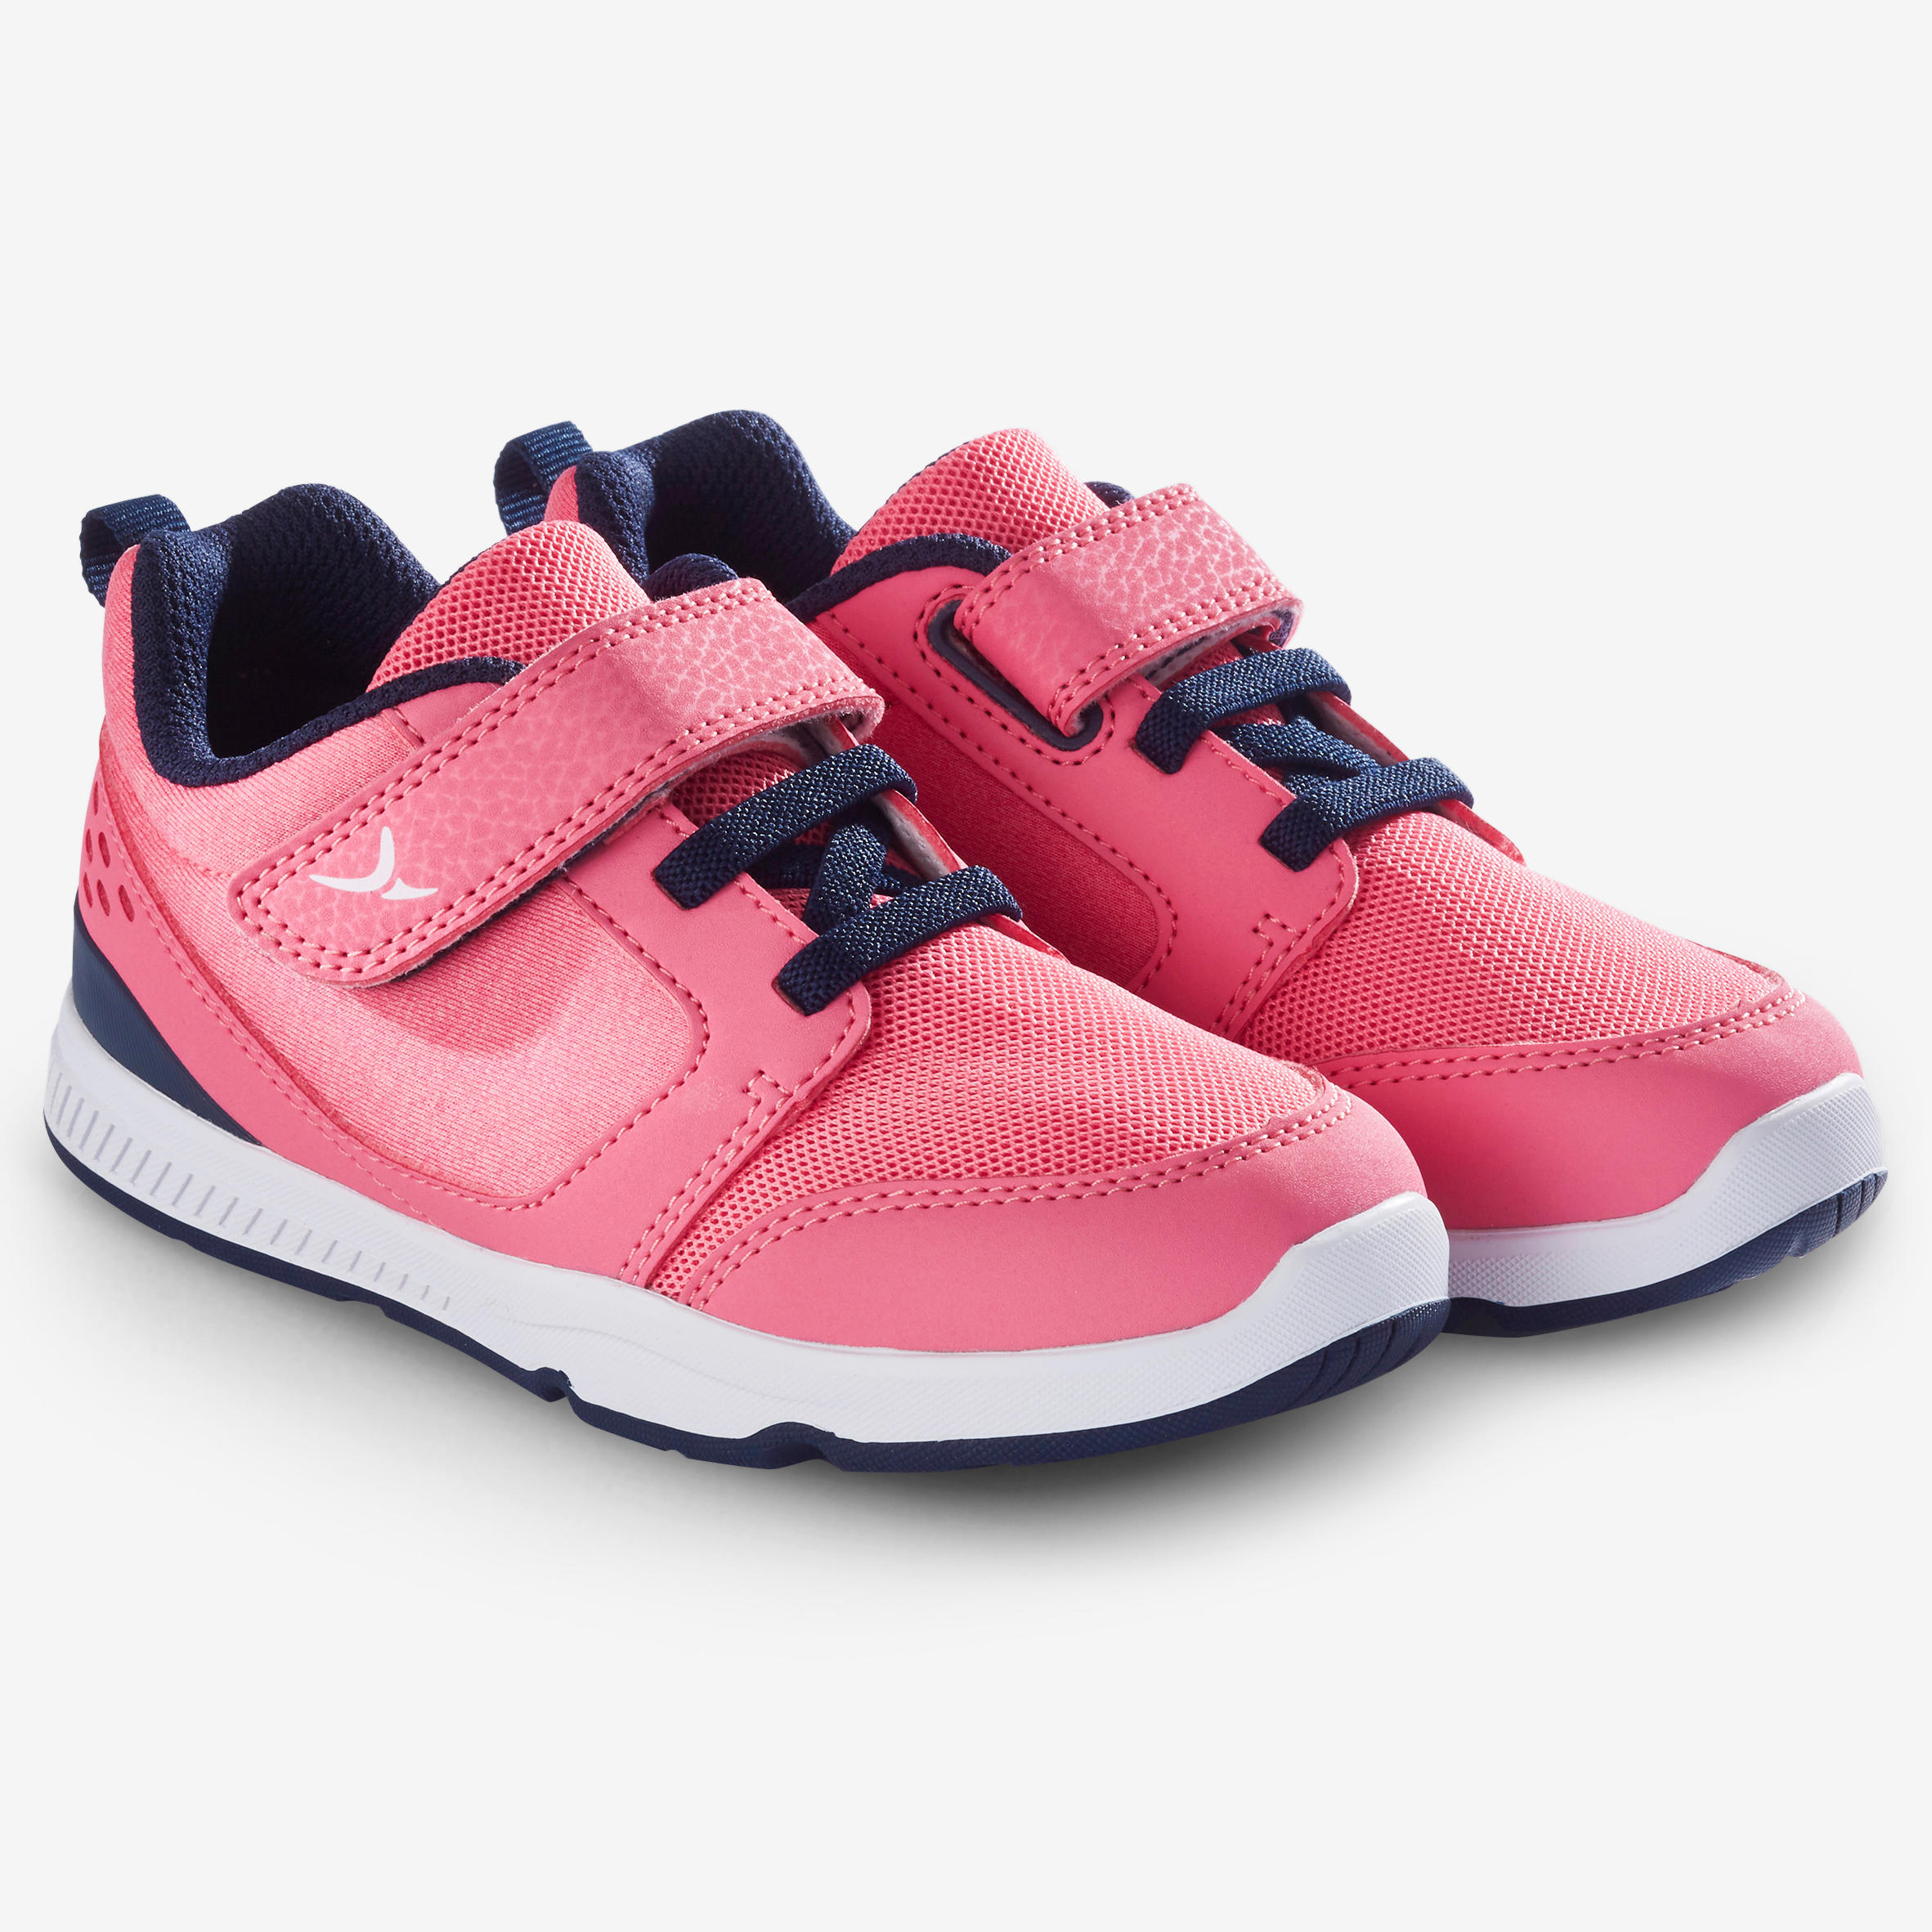 Kids' Comfortable and Breathable Shoes 6/8